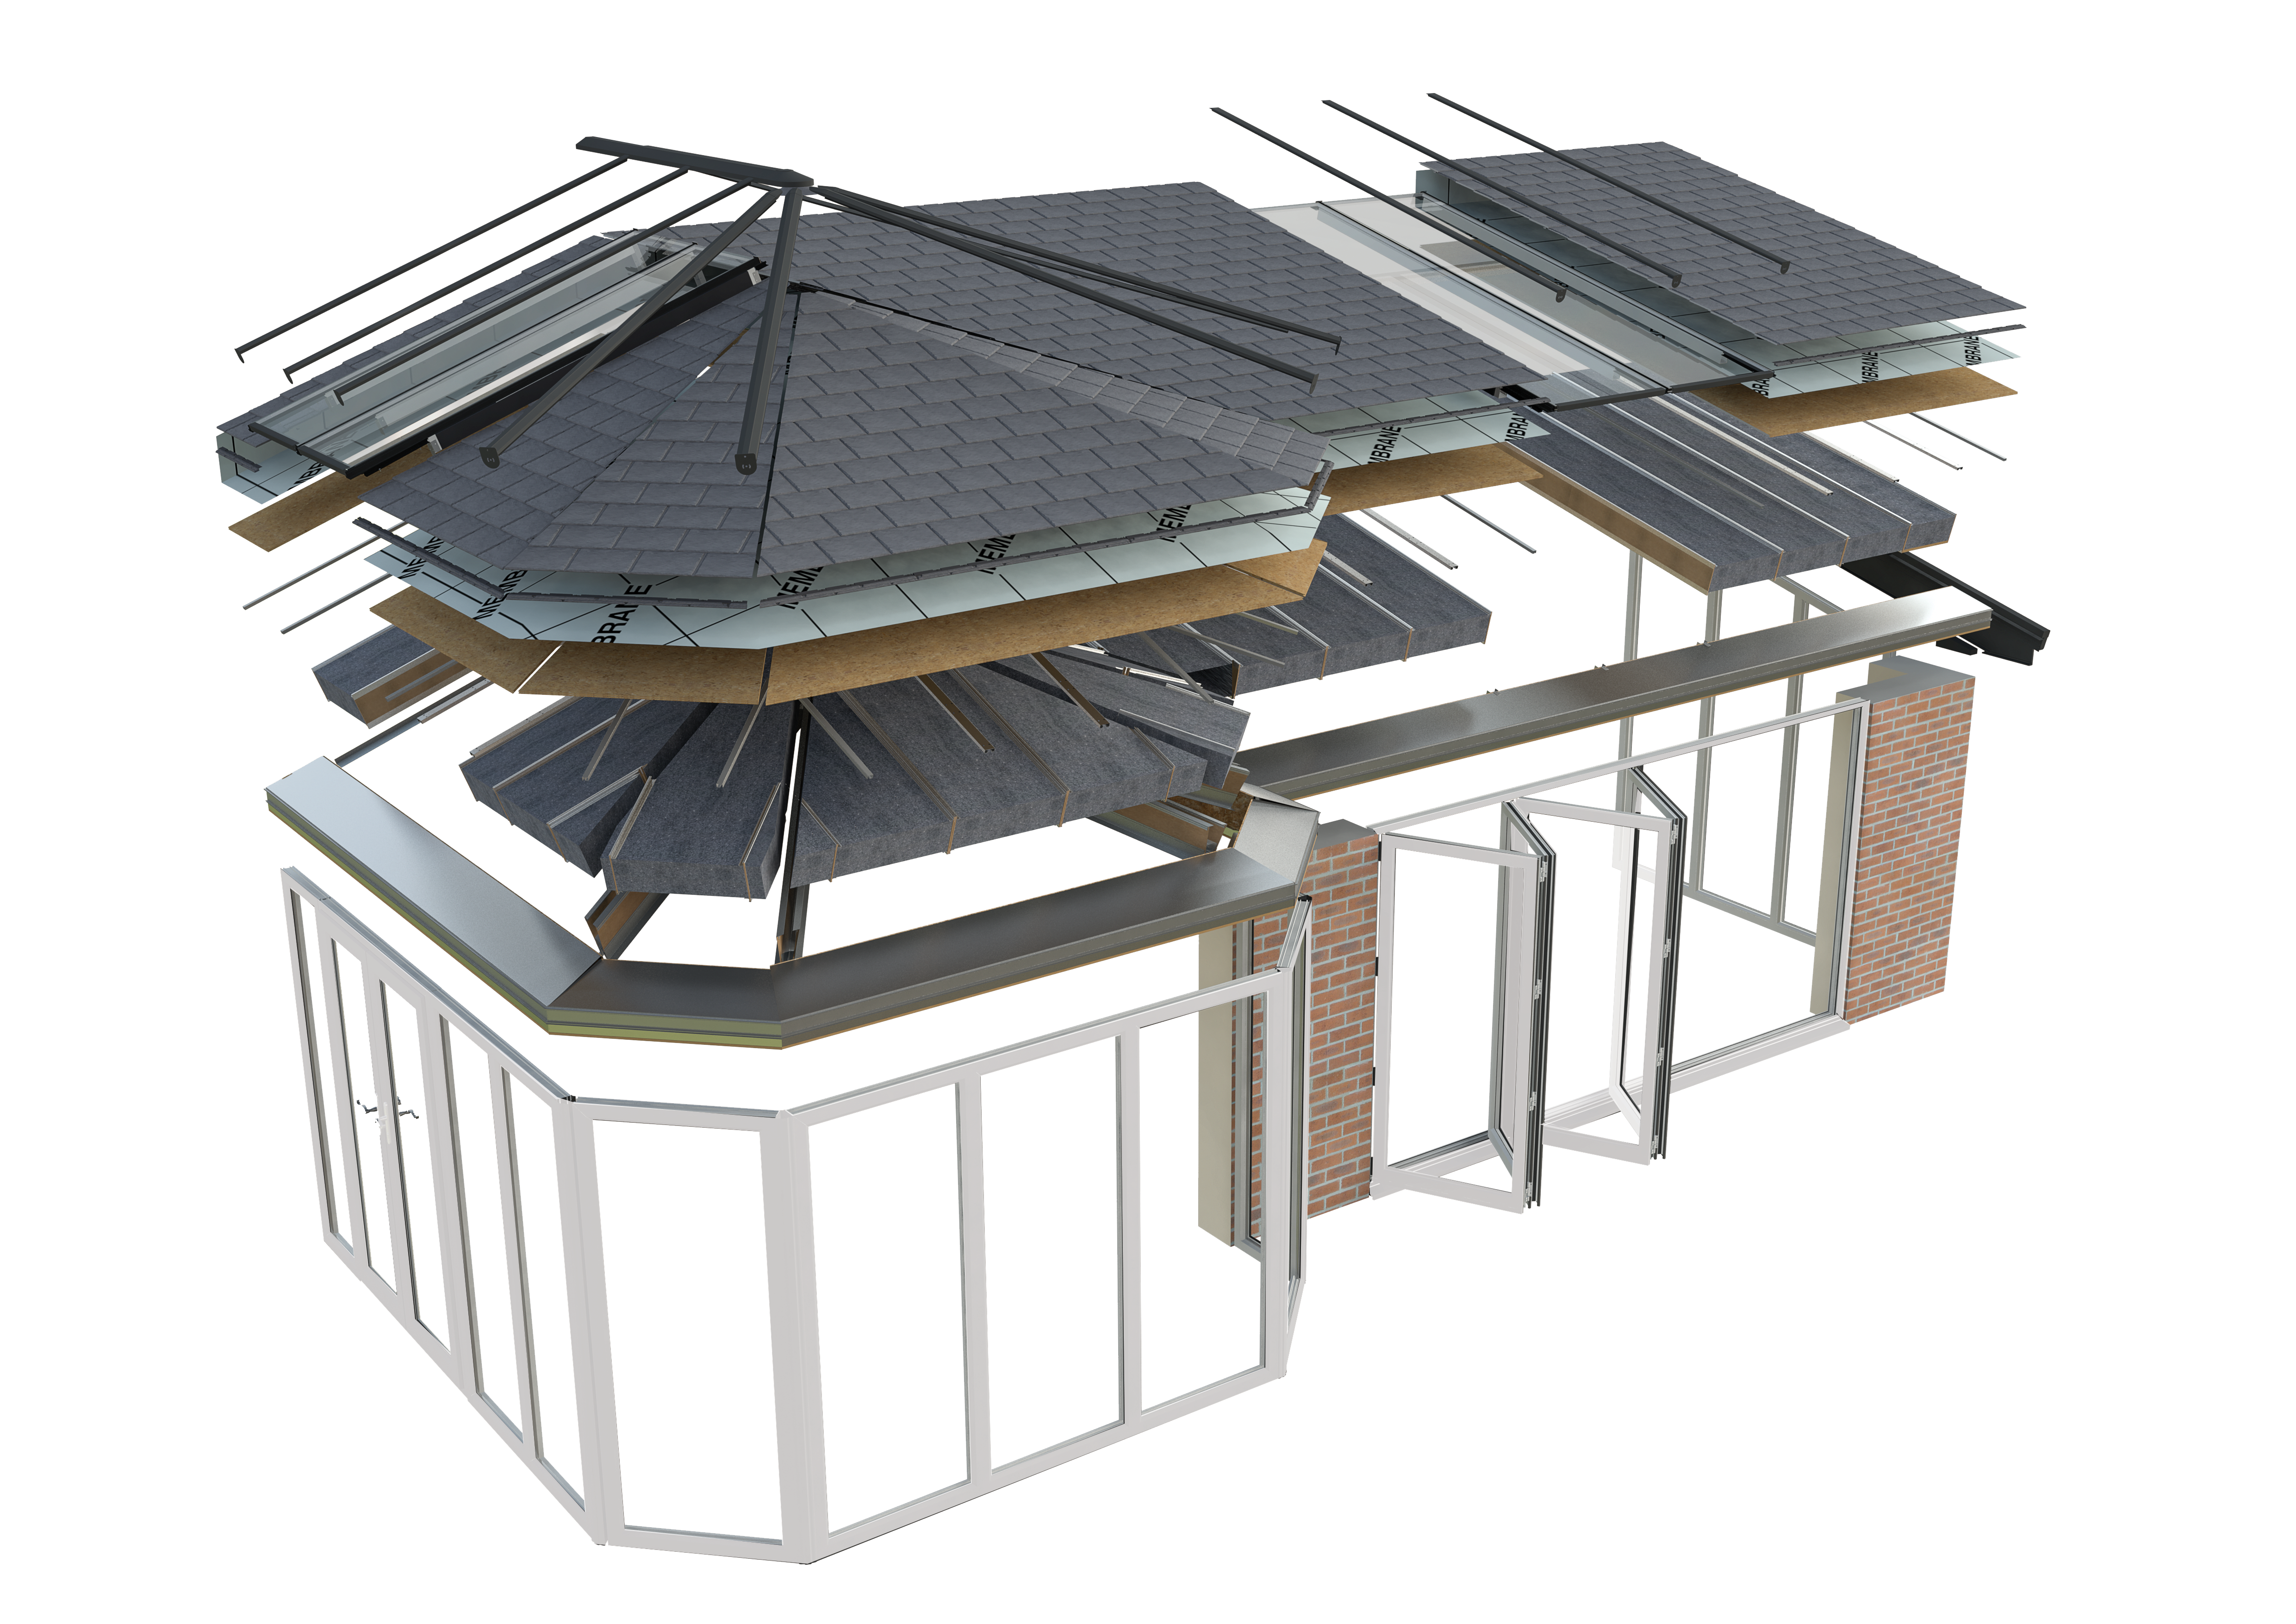 exploded view of a tiled conservatory roof